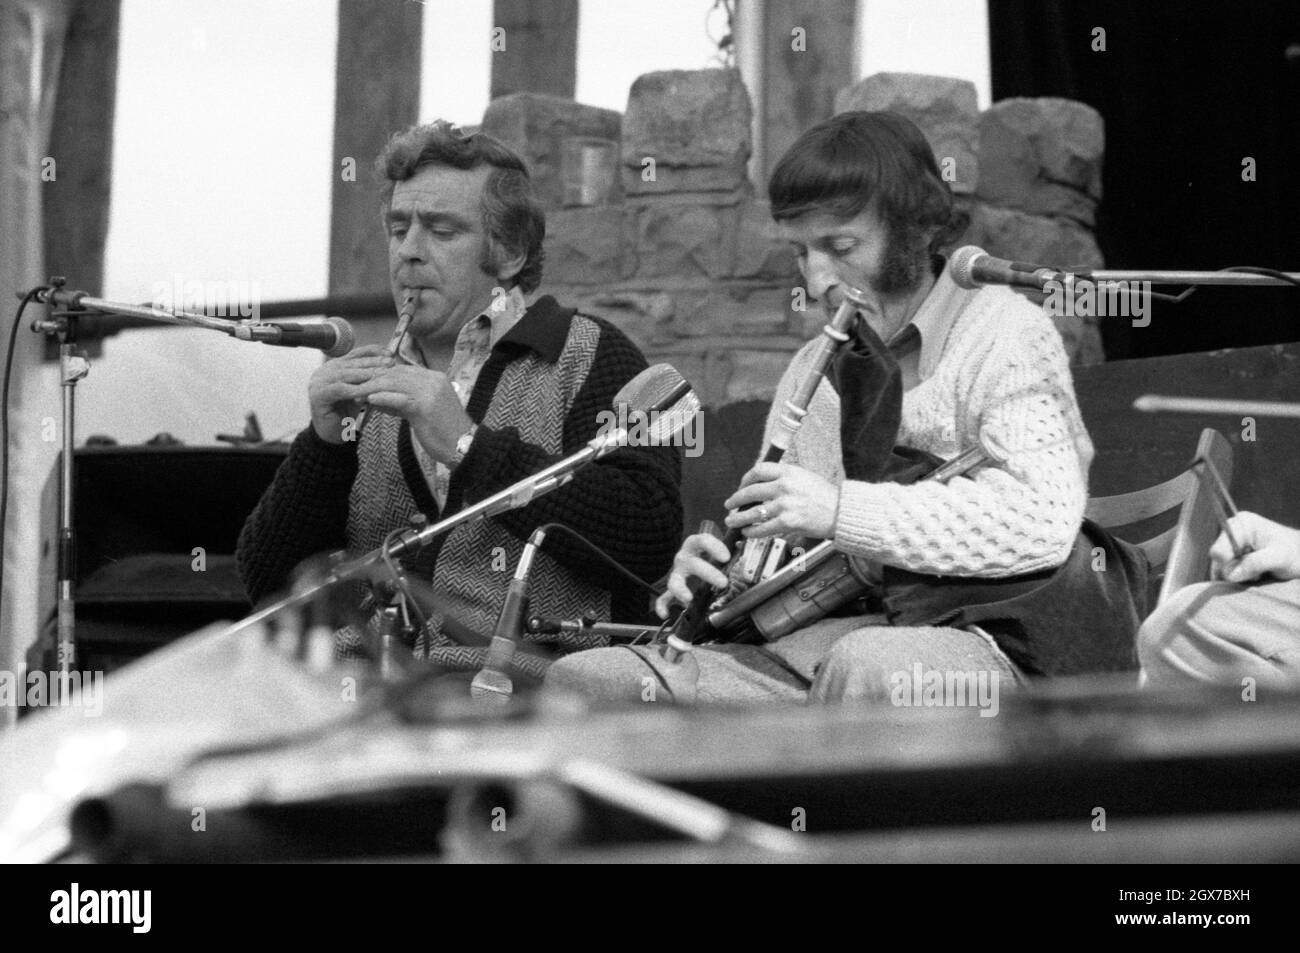 Seán Potts (left) and Paddy Moloney performing with The Chieftains at the July Wakes folk festival in Chorley, Lancashire, England on 25 July 1976. Stock Photo